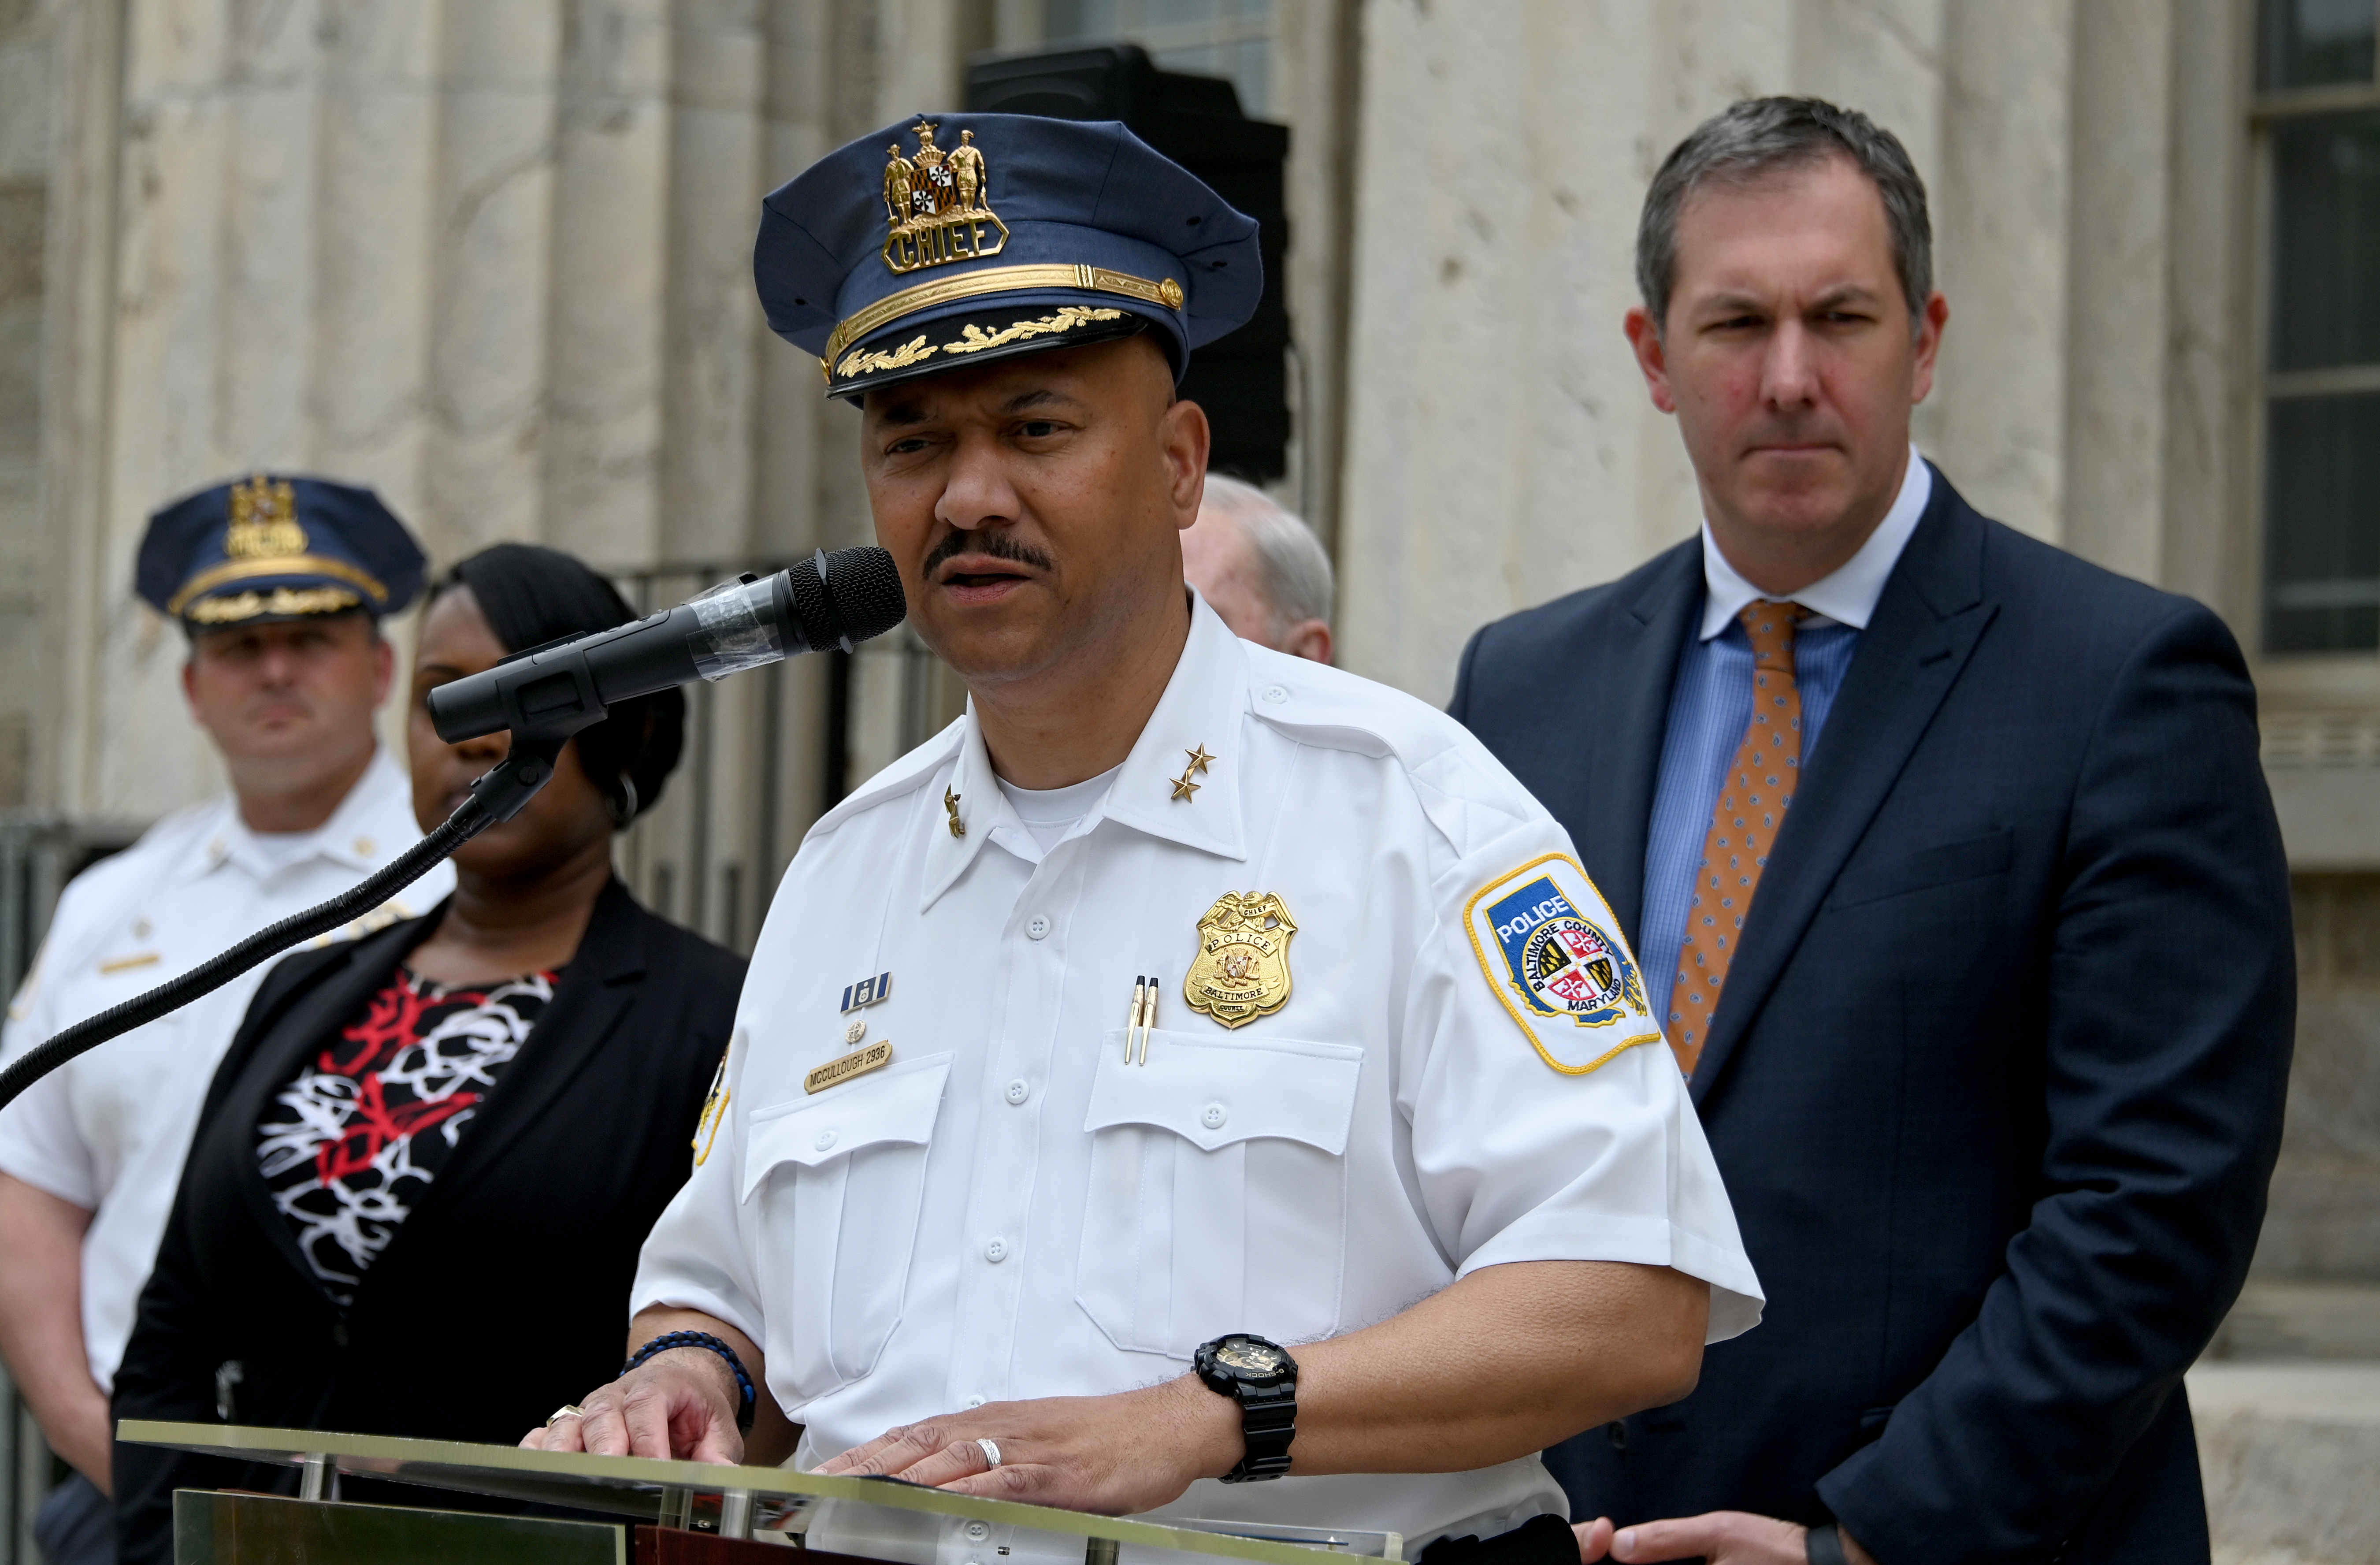 Baltimore County Police Chief Robert McCullough speaks about the arrest of Dazhon Darien, Pikesville High's athletic director, who allegedly used artificial intelligence to create a fake racist recording of the school's principal. On right is Baltimore County Executive John Olszewski, Jr. (Kim Hairston/Staff)